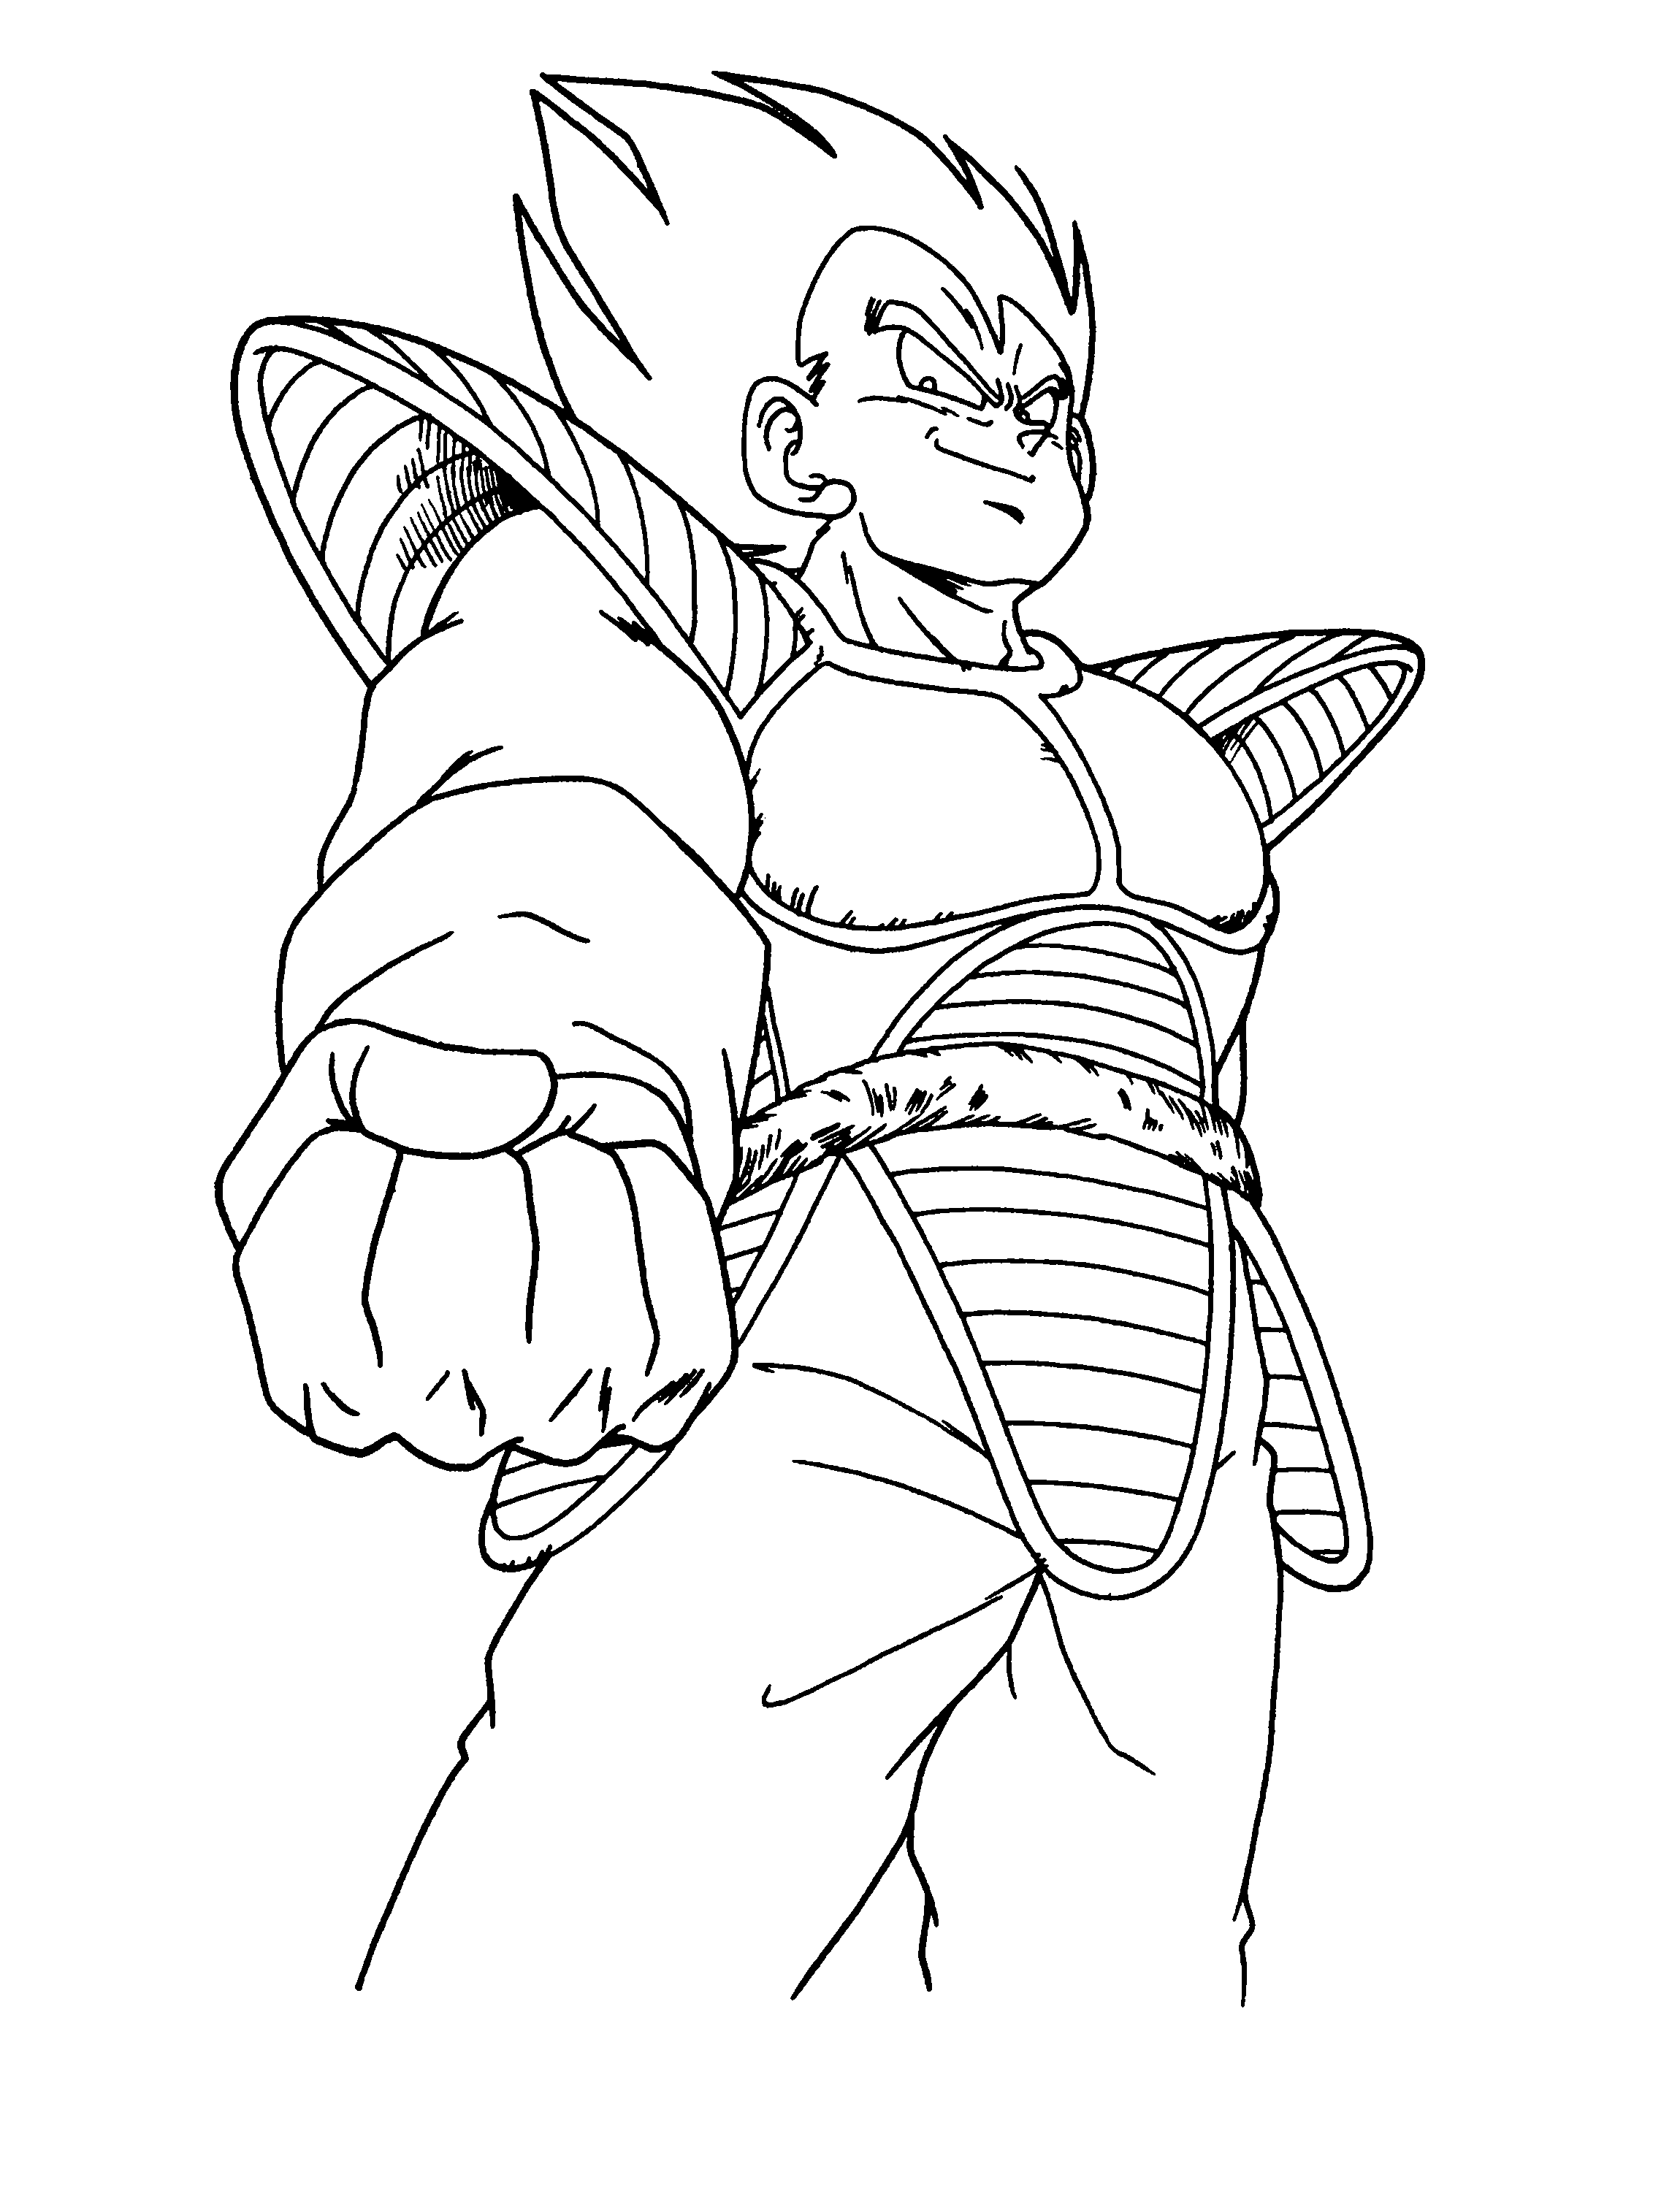 dragon-ball-coloring-pages-best-coloring-pages-for-kids